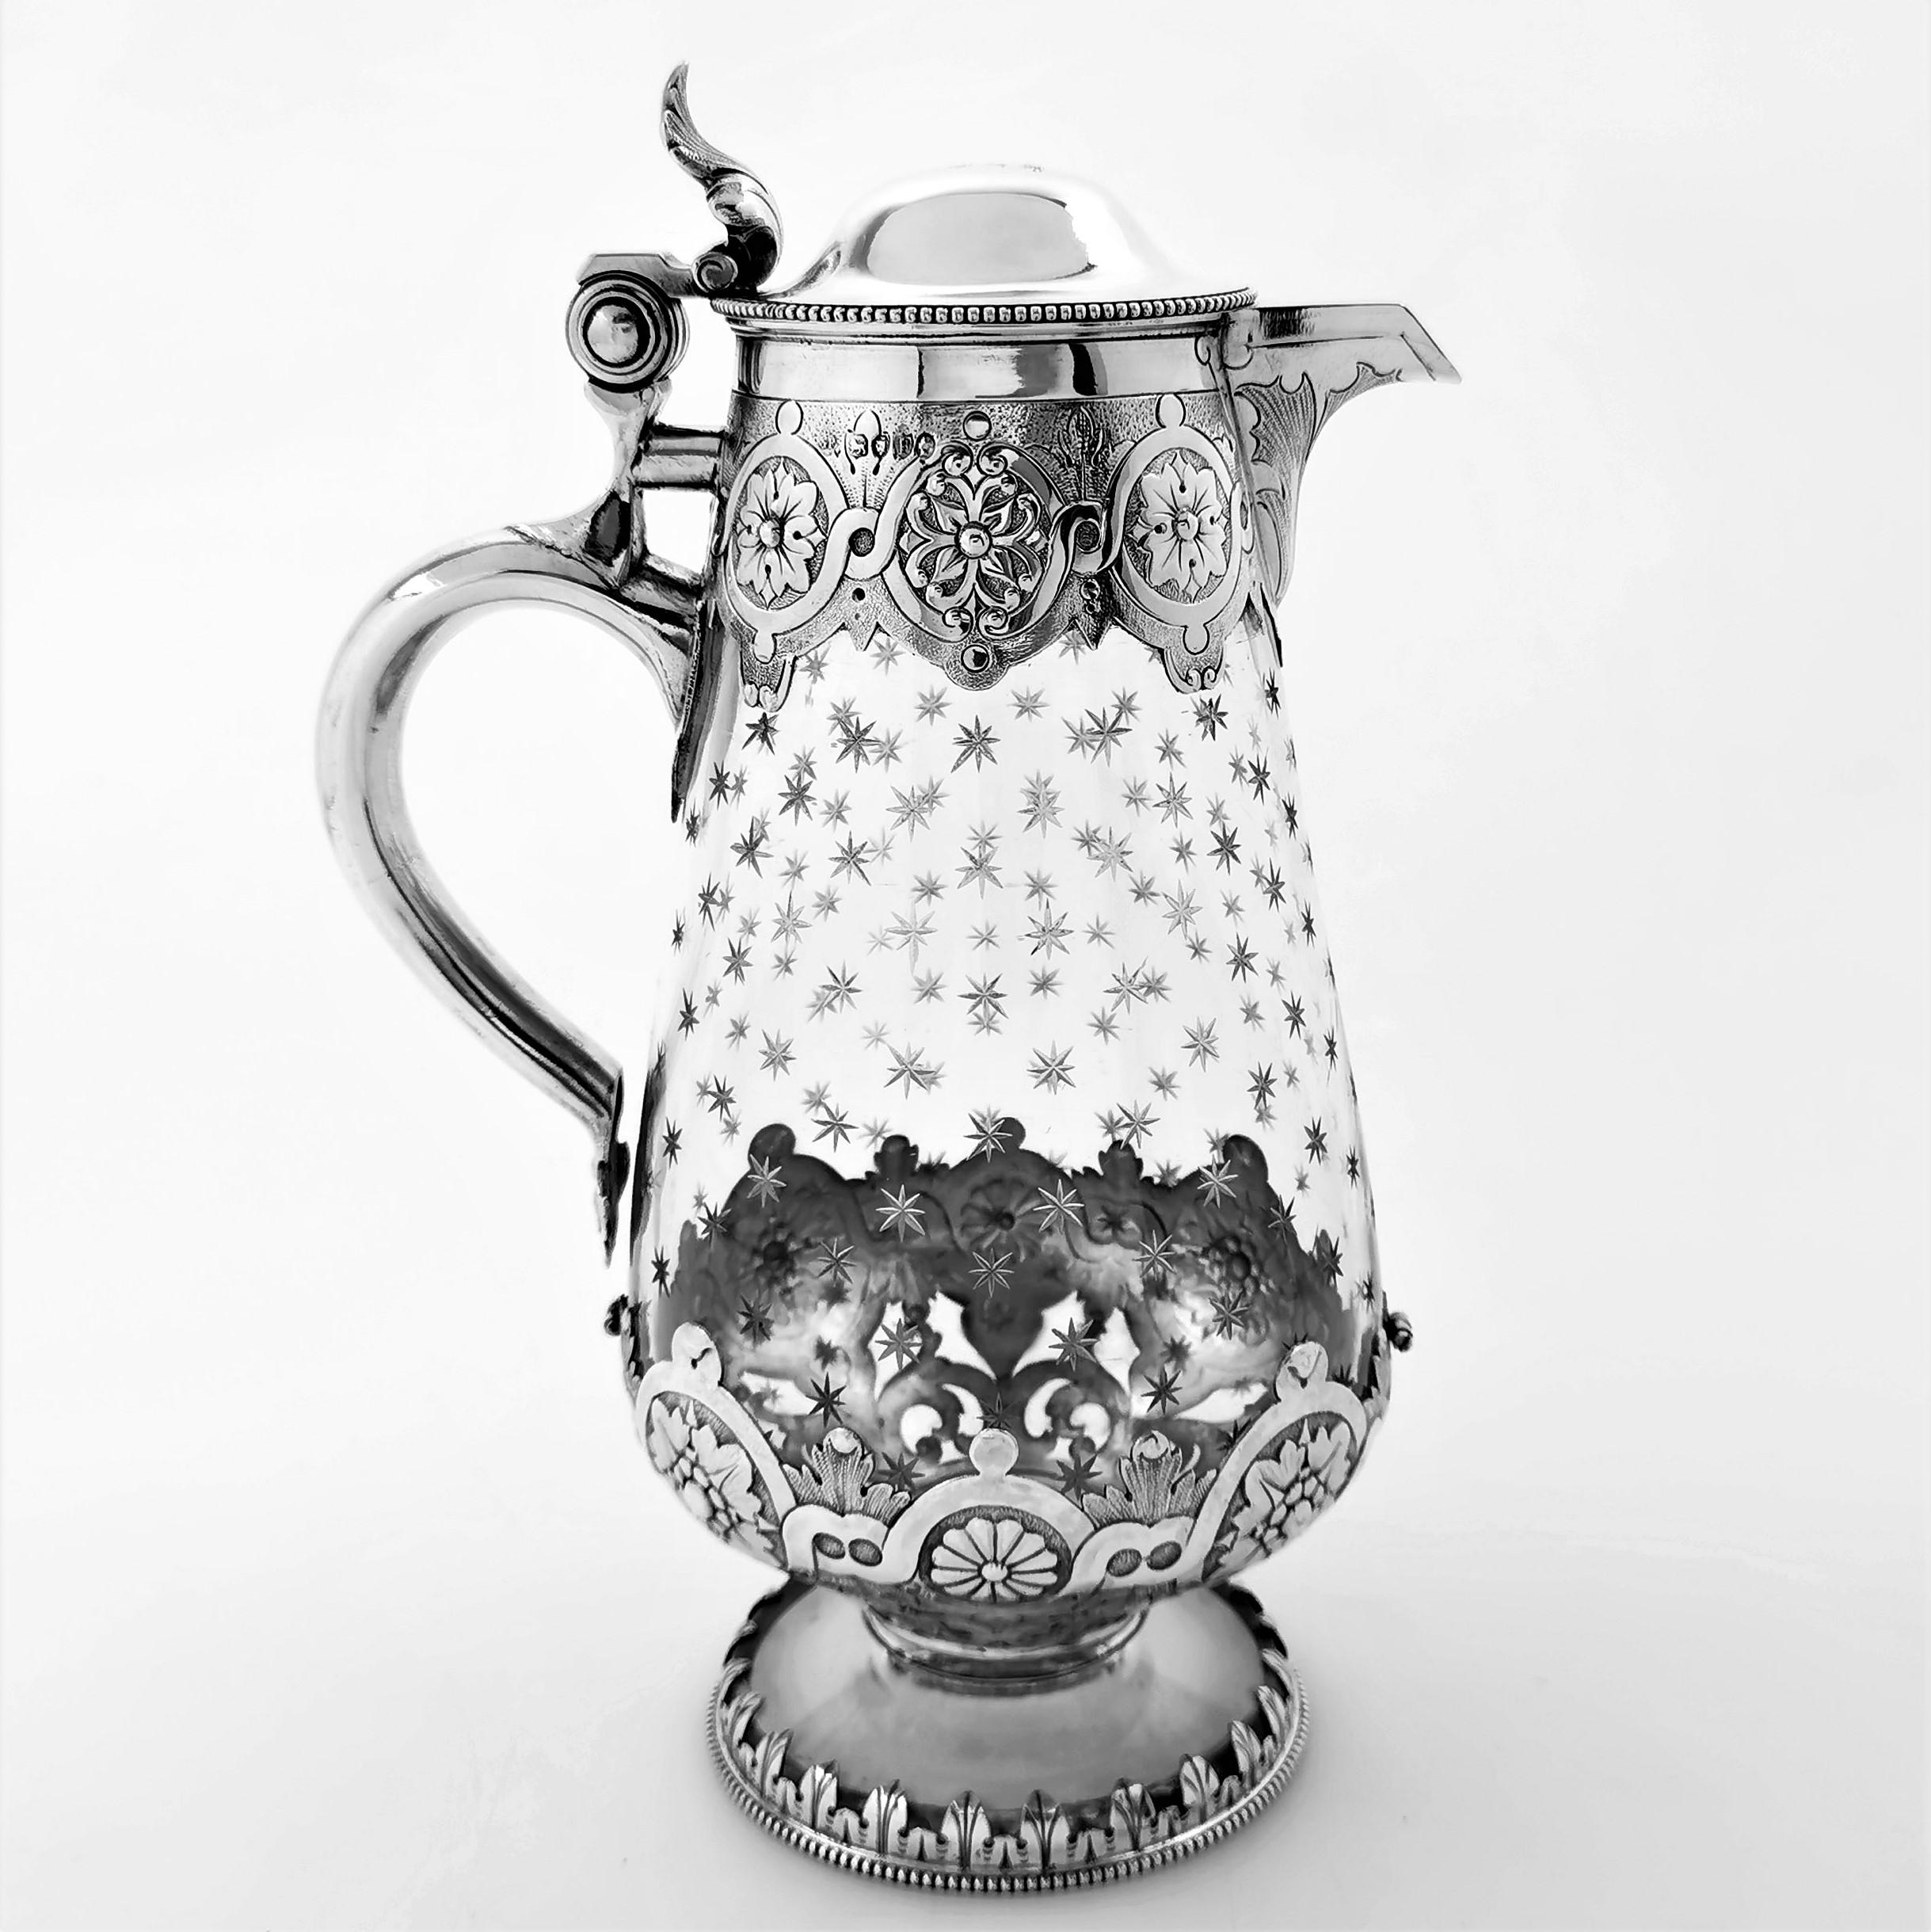 A lovely Antique Victorian solid Silver mounted Claret Jug with a clear glass body. The Claret Jug is decorated with band of ornate chased designs on the upper and lower parts of the body. The Jug has a plain domed hinged lid with a small crest